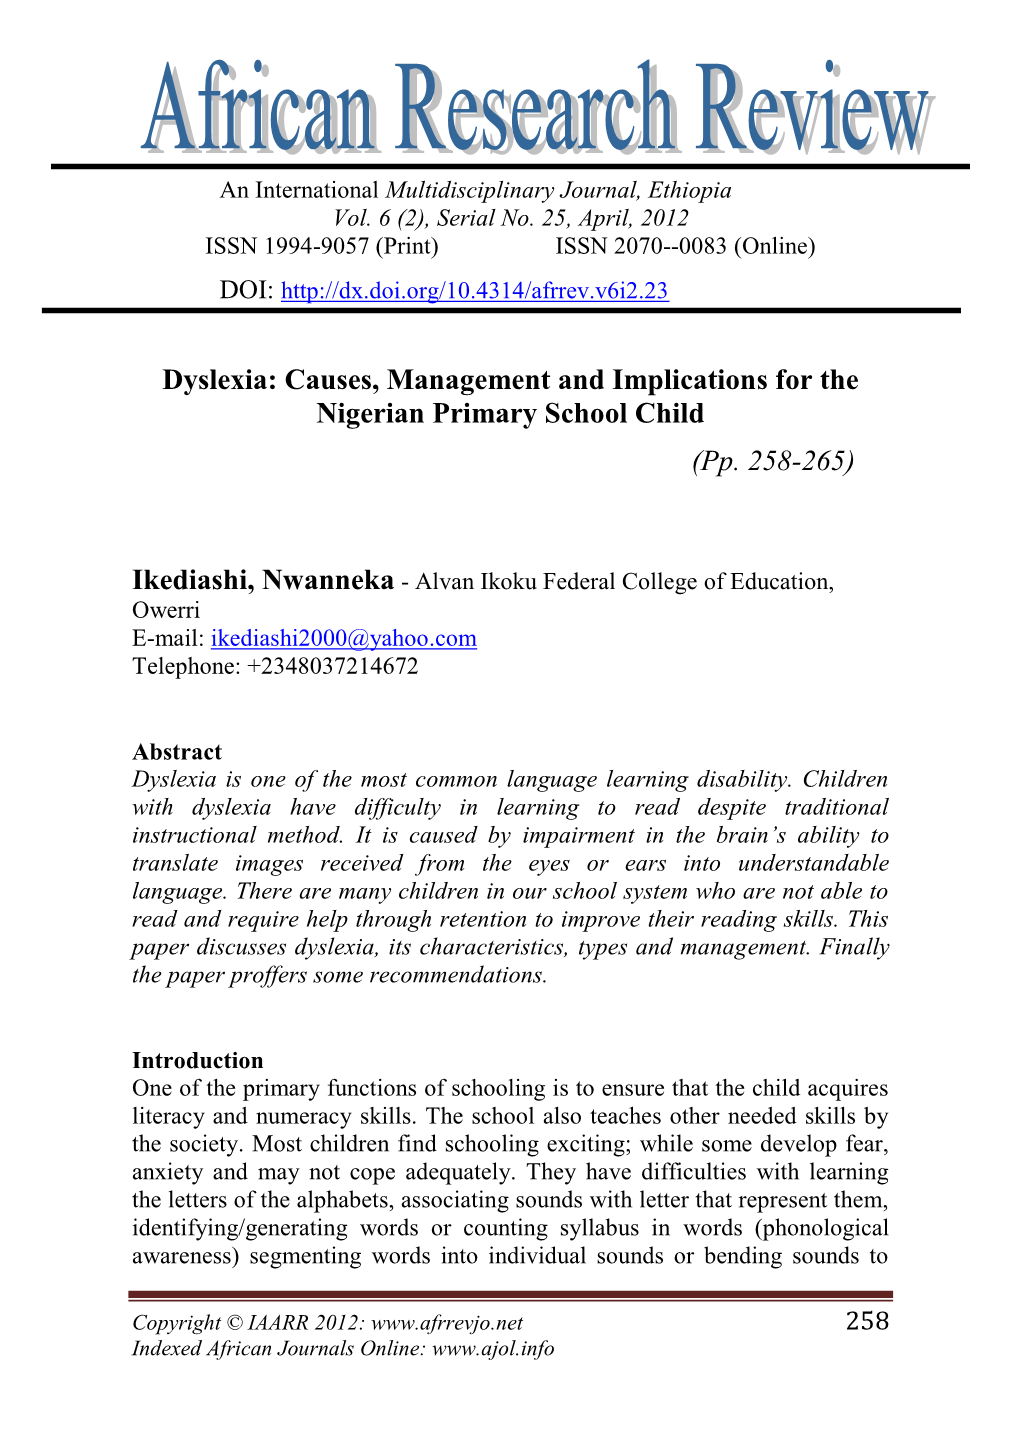 Dyslexia: Causes, Management and Implications for the Nigerian Primary School Child (Pp